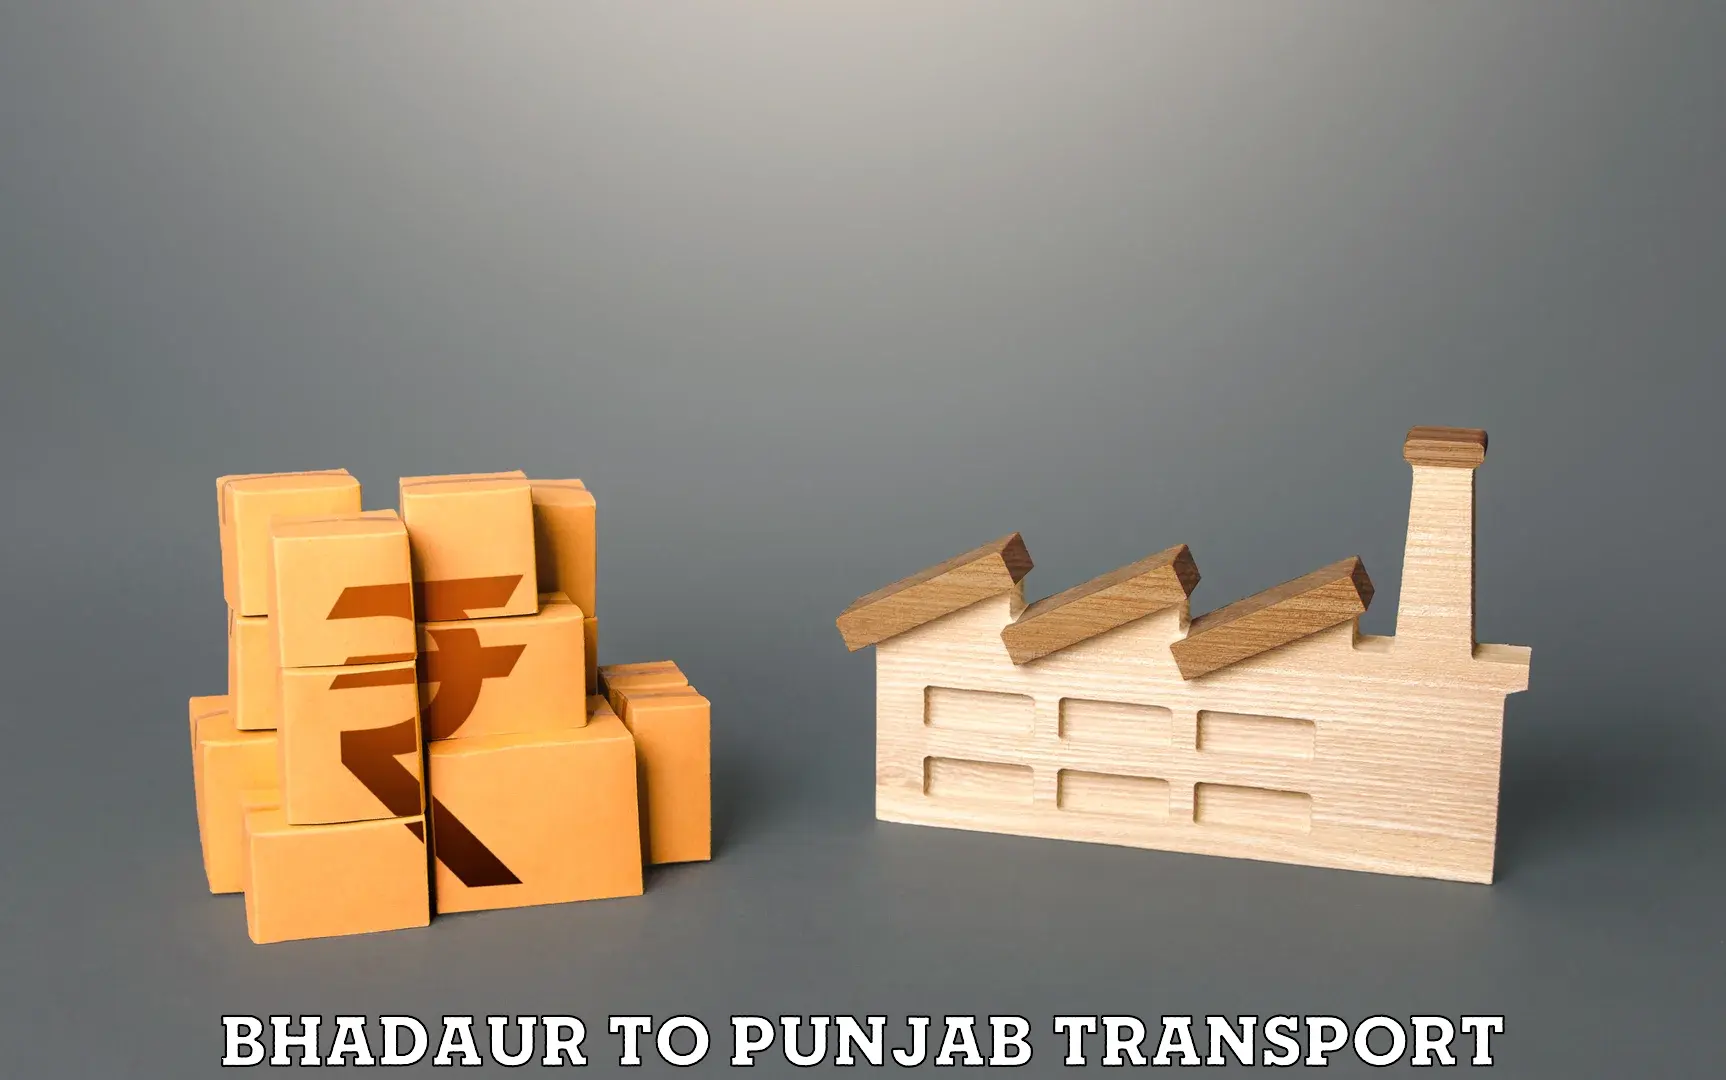 Daily parcel service transport Bhadaur to Amritsar